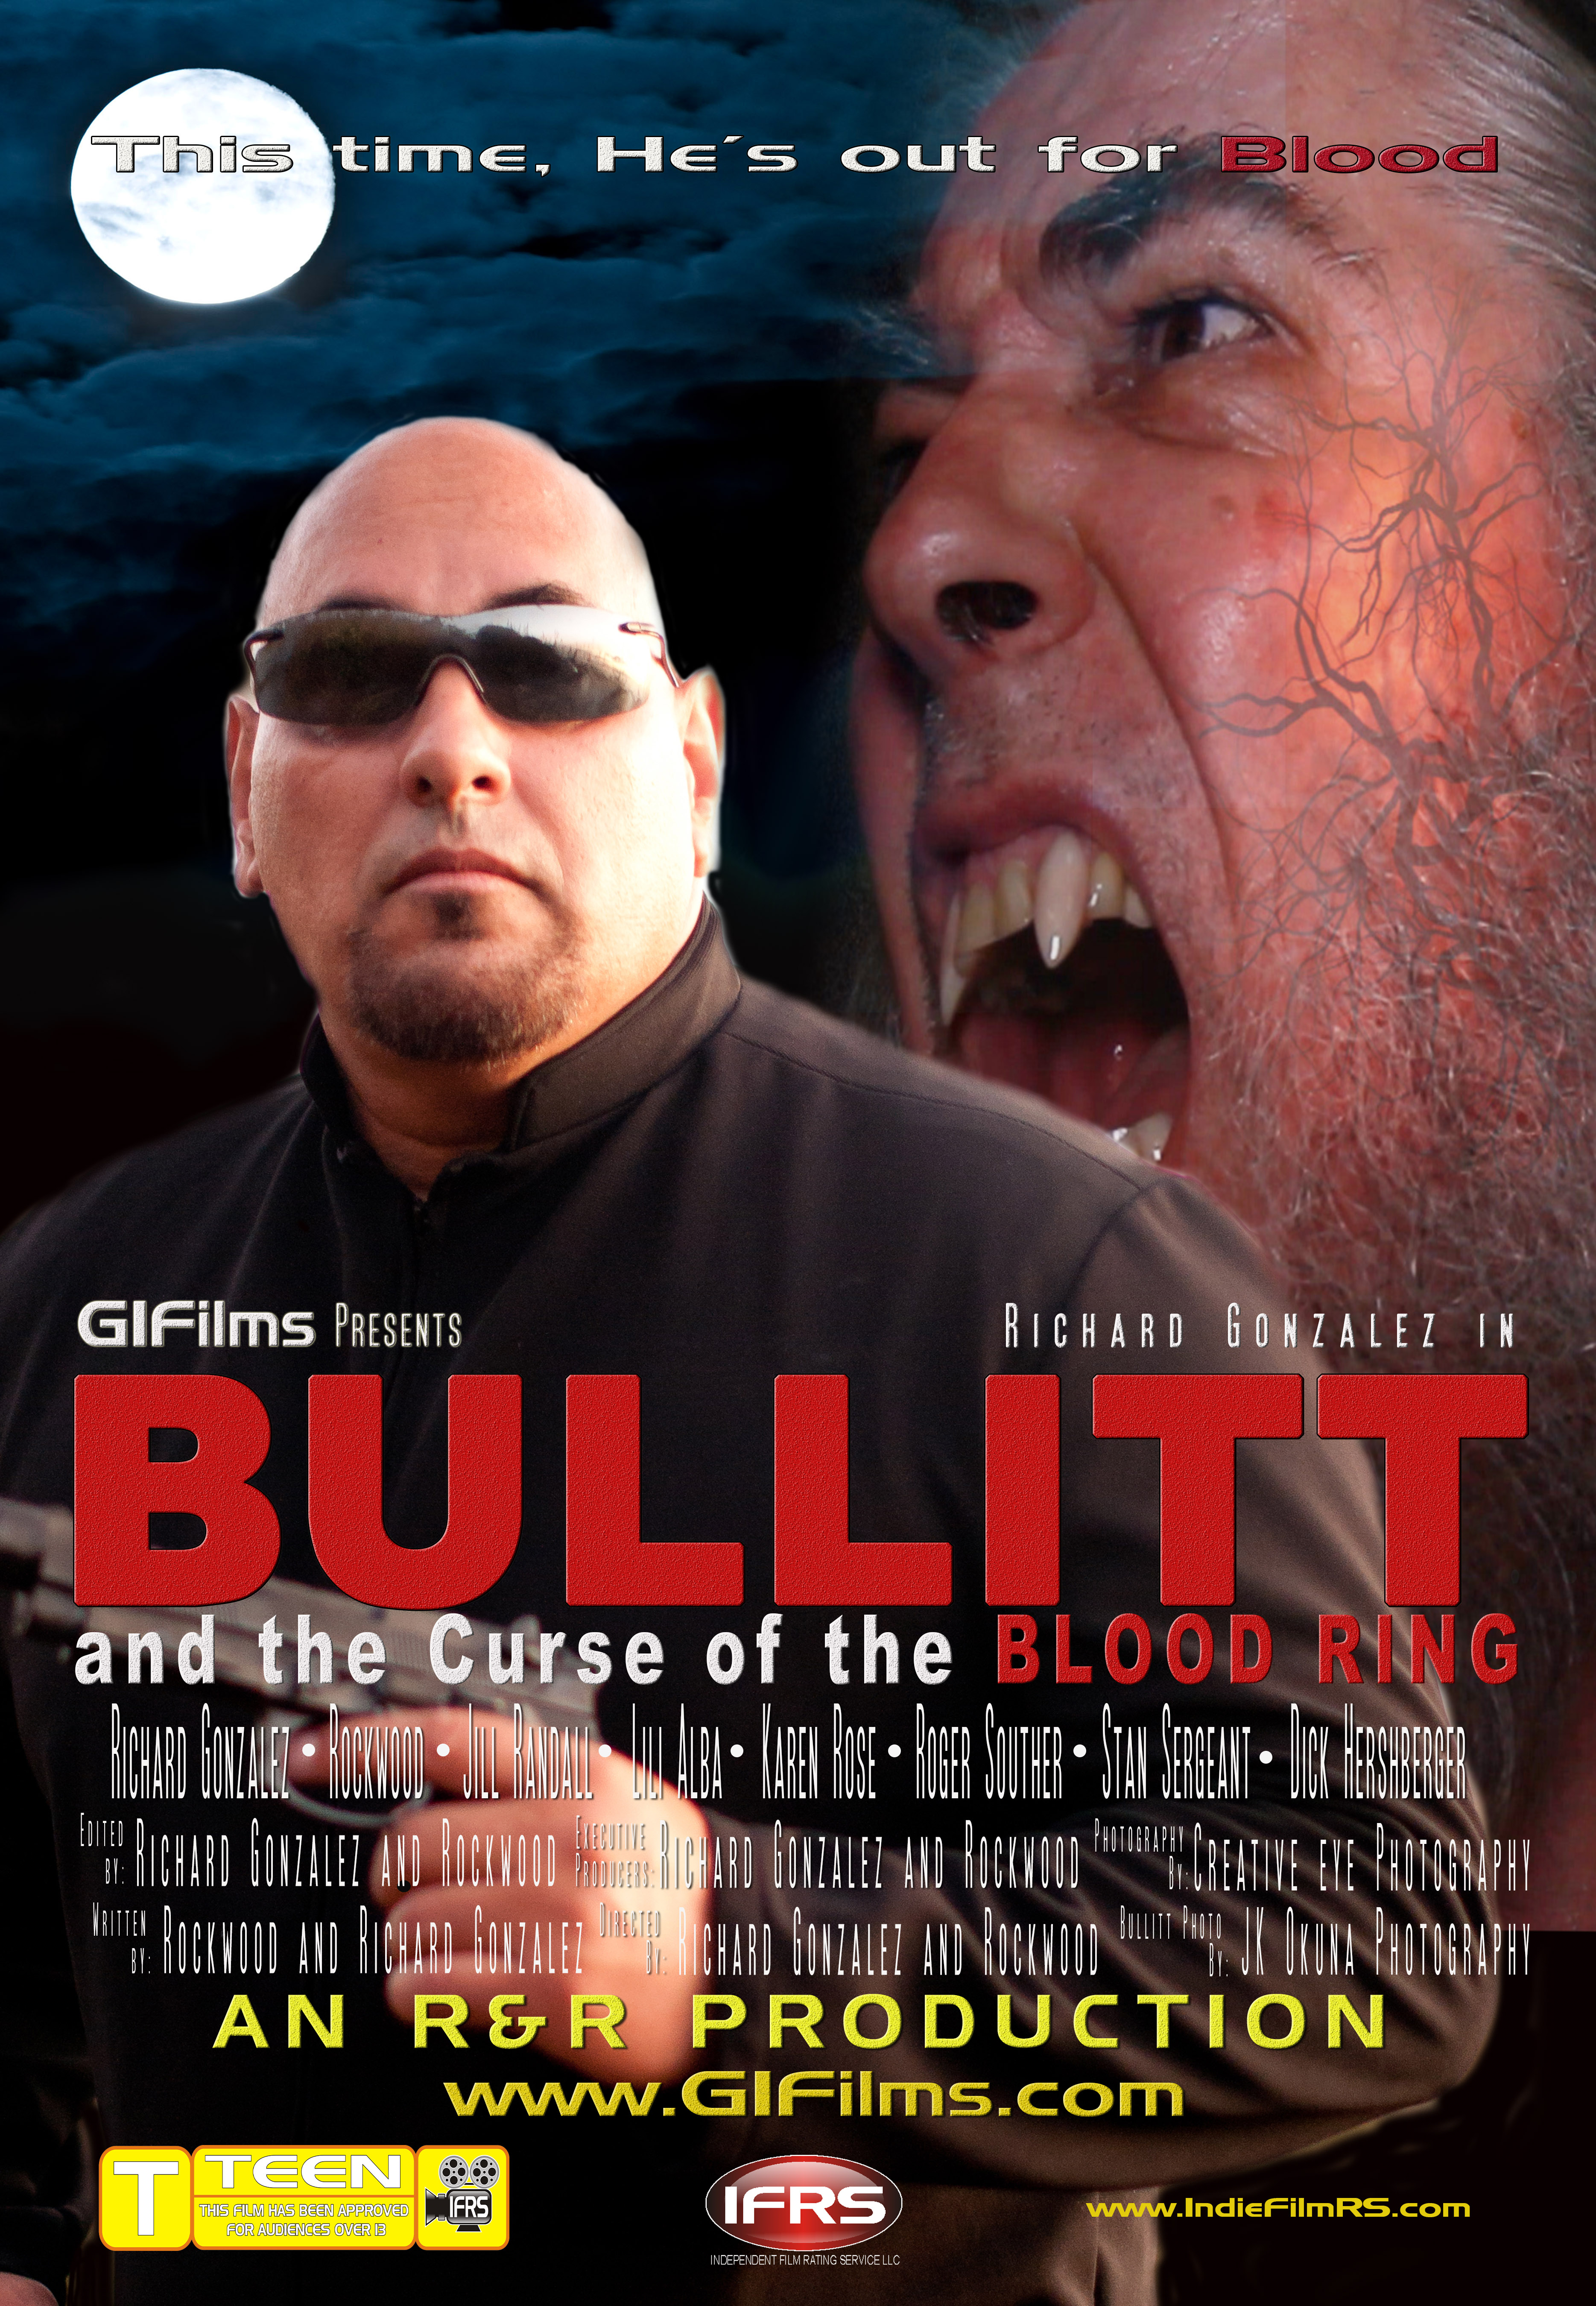 The latest from GIFilms: BULLITT and the Curse of the BLOOD RING 2014